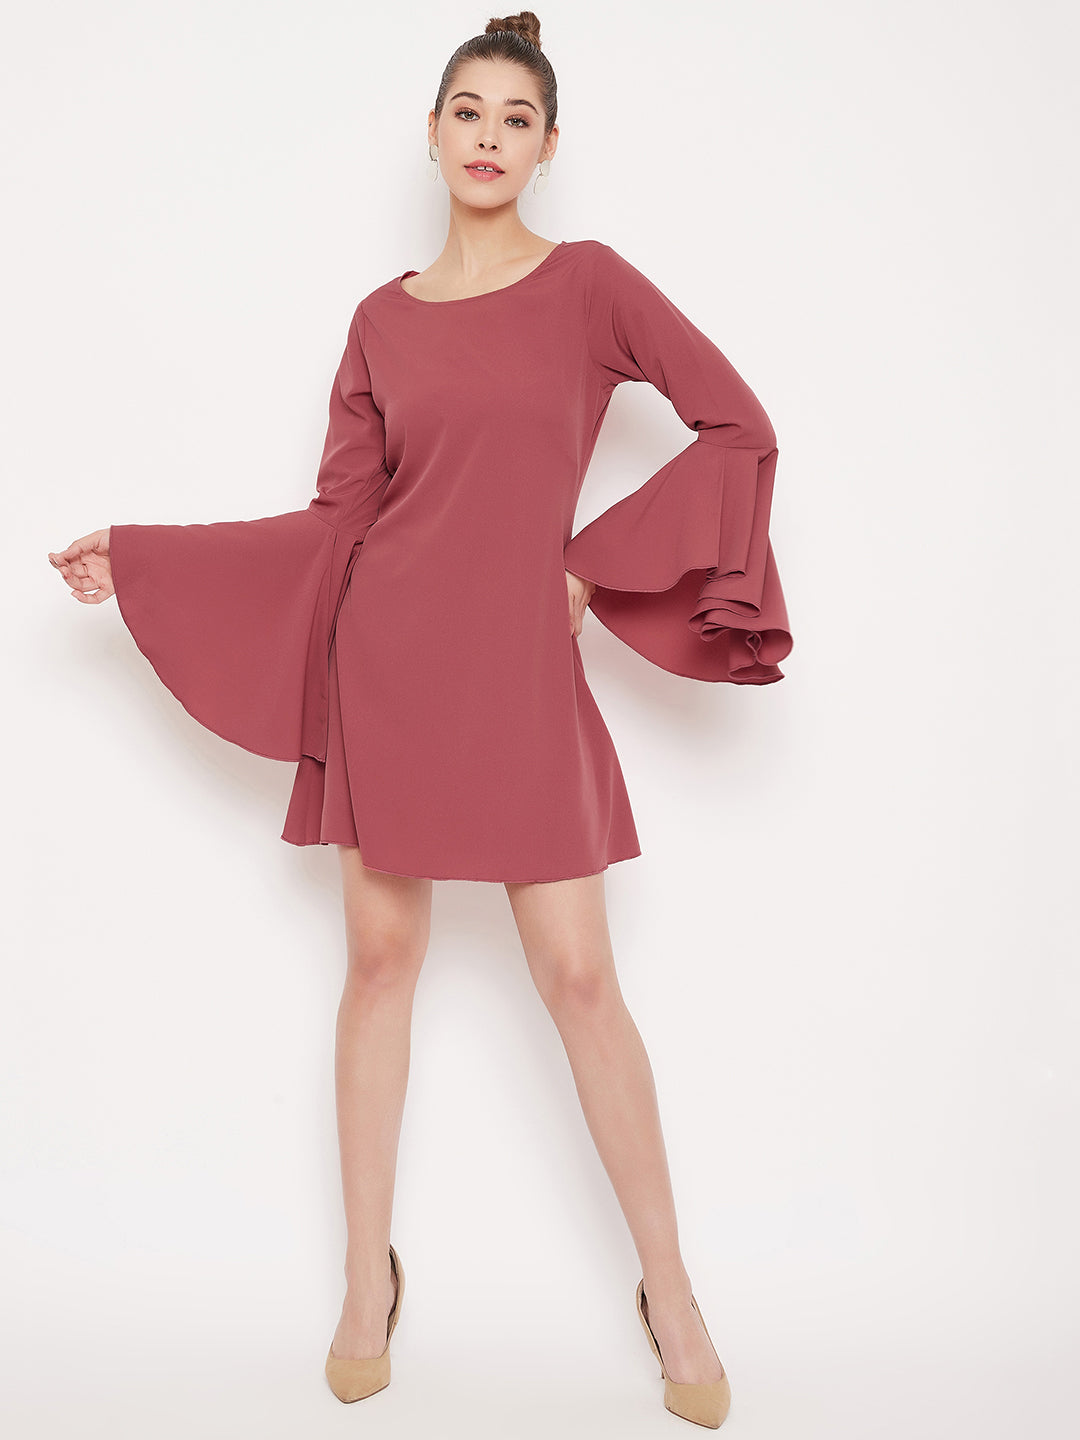 Berrylush Pink Solid Flared Sleeves Dress